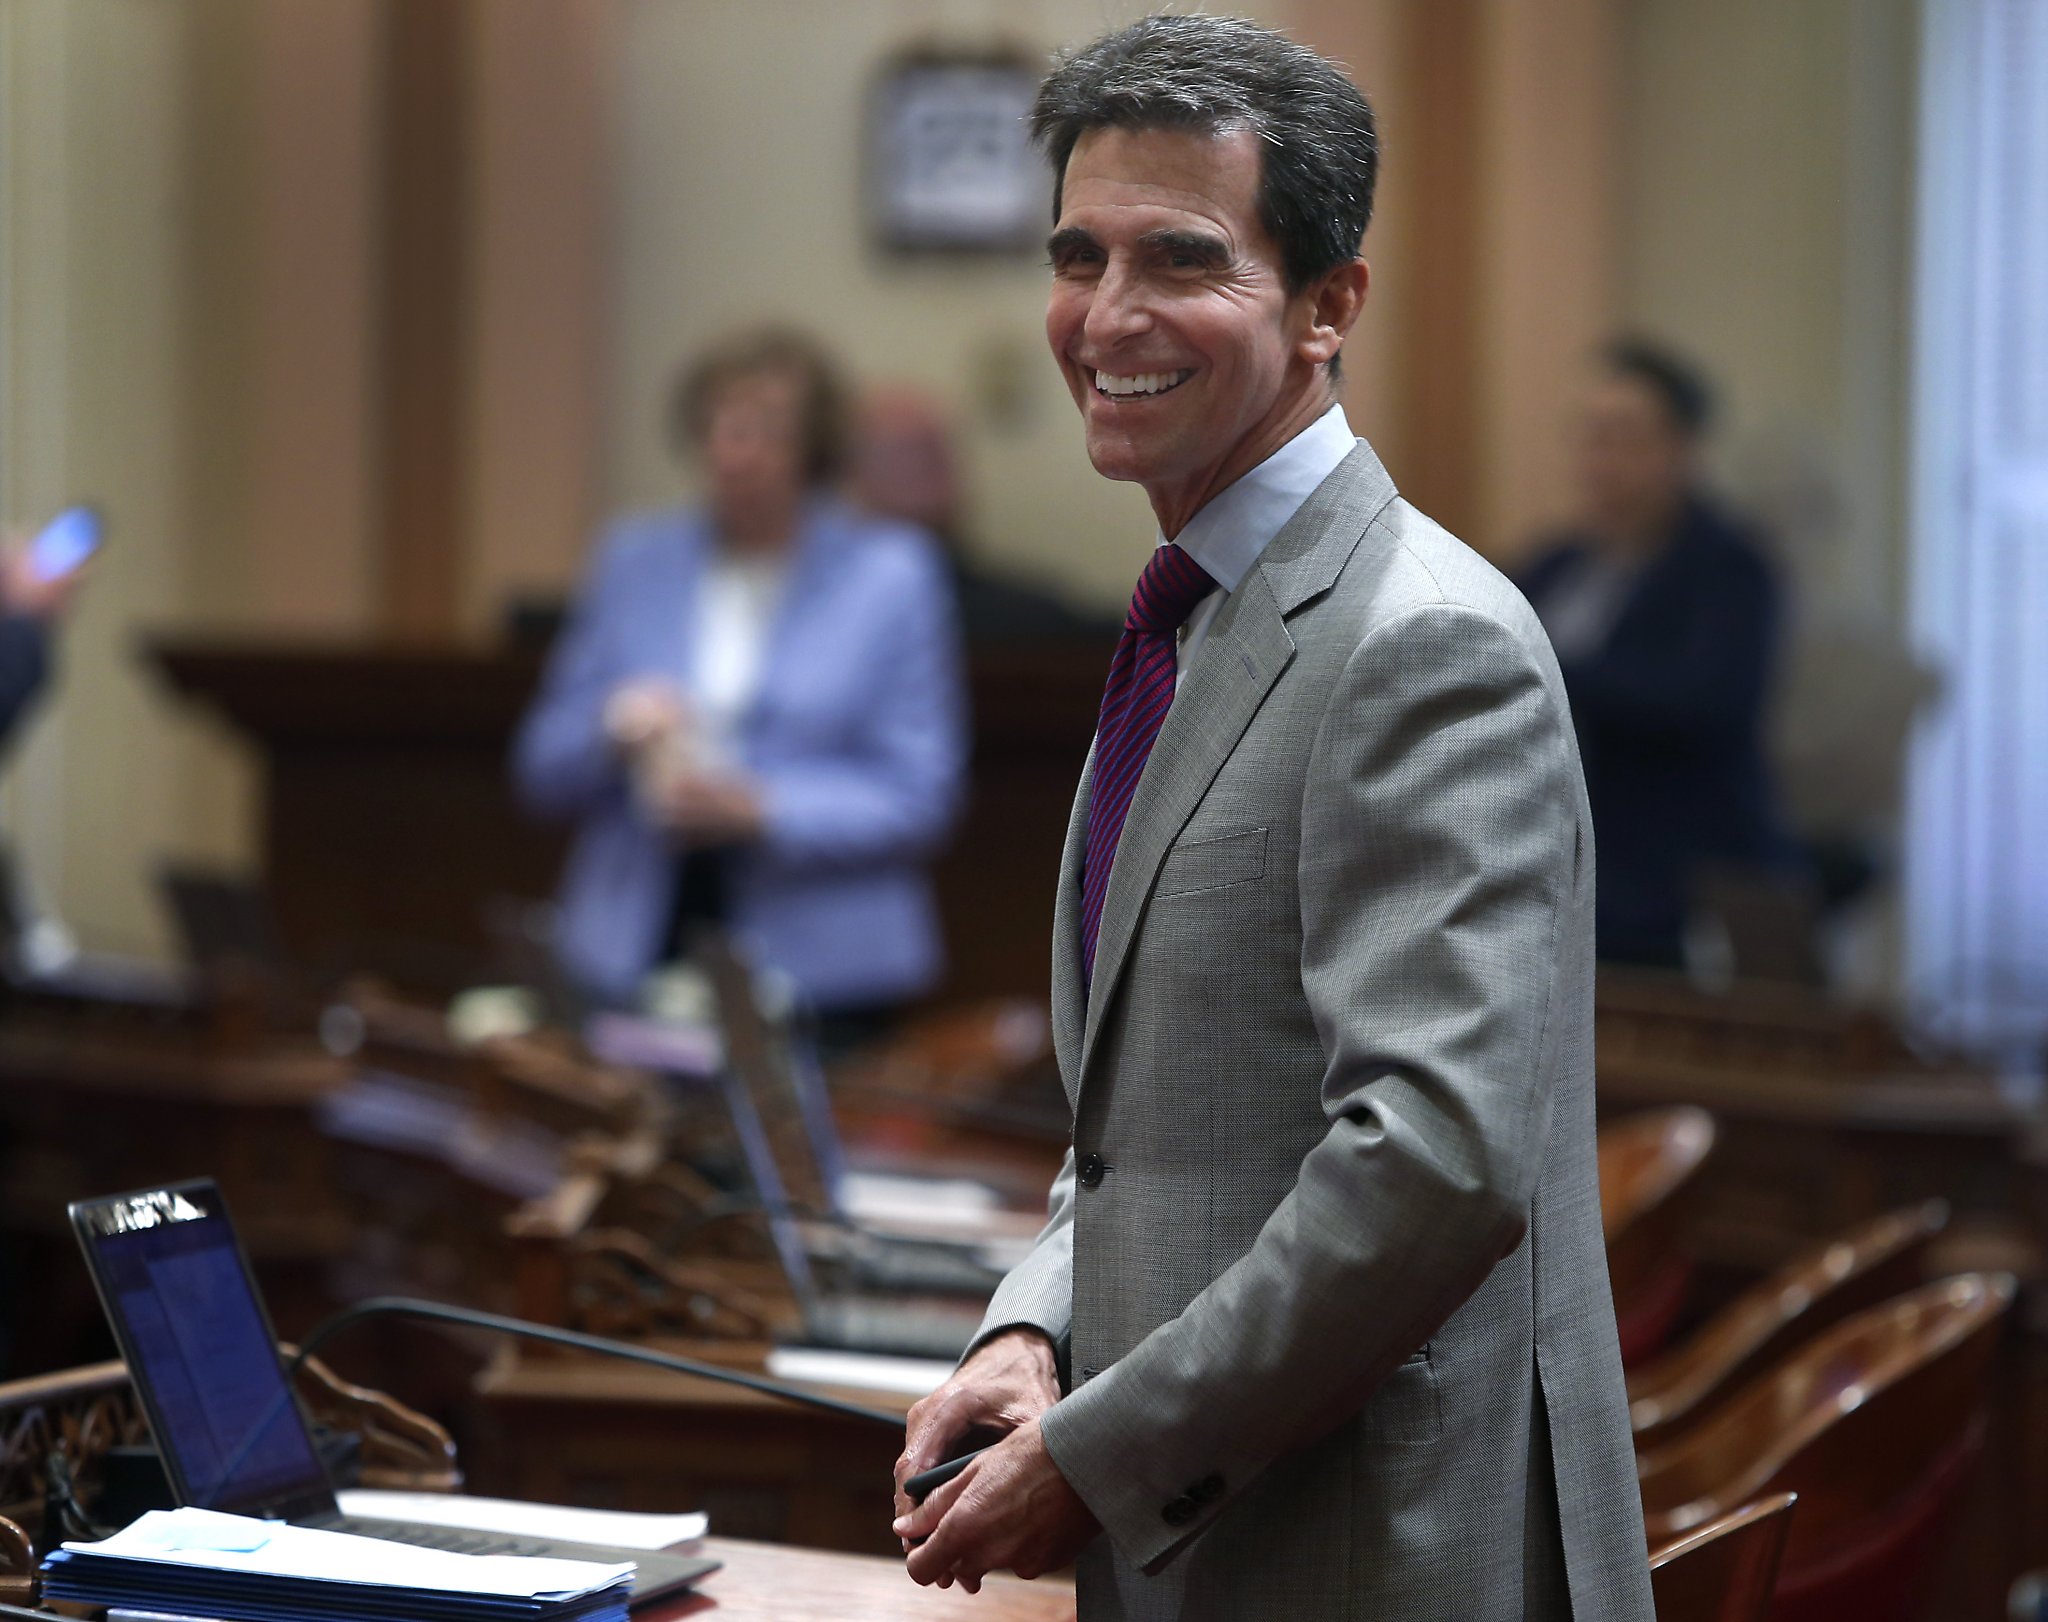 10 Questions with a Local: Mark Leno on his beloved adopted city - SFGate